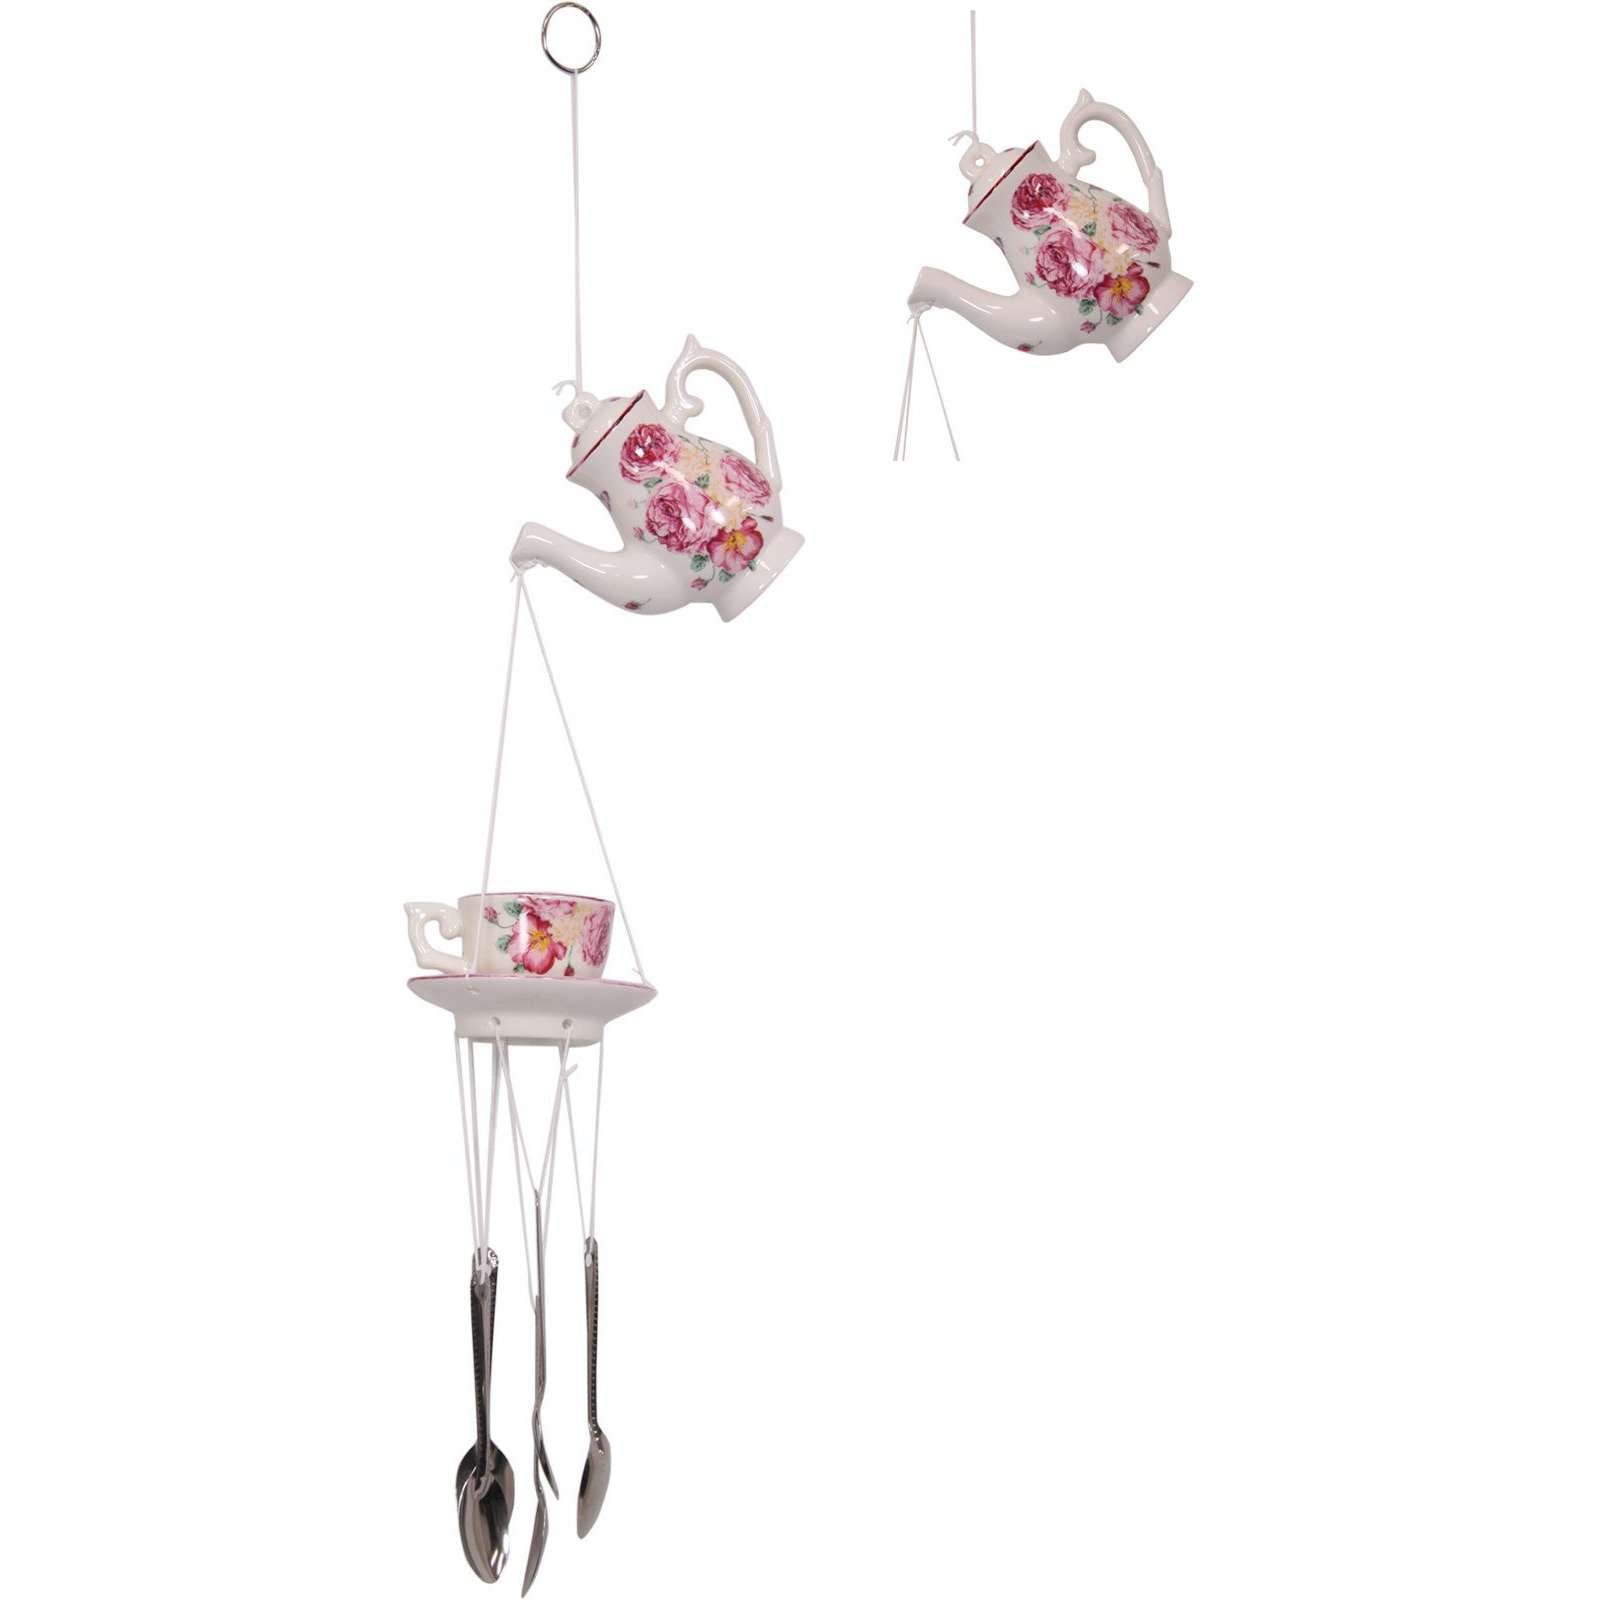 Teapot Teacup and Spoons Wind Chime - Dollars and Sense